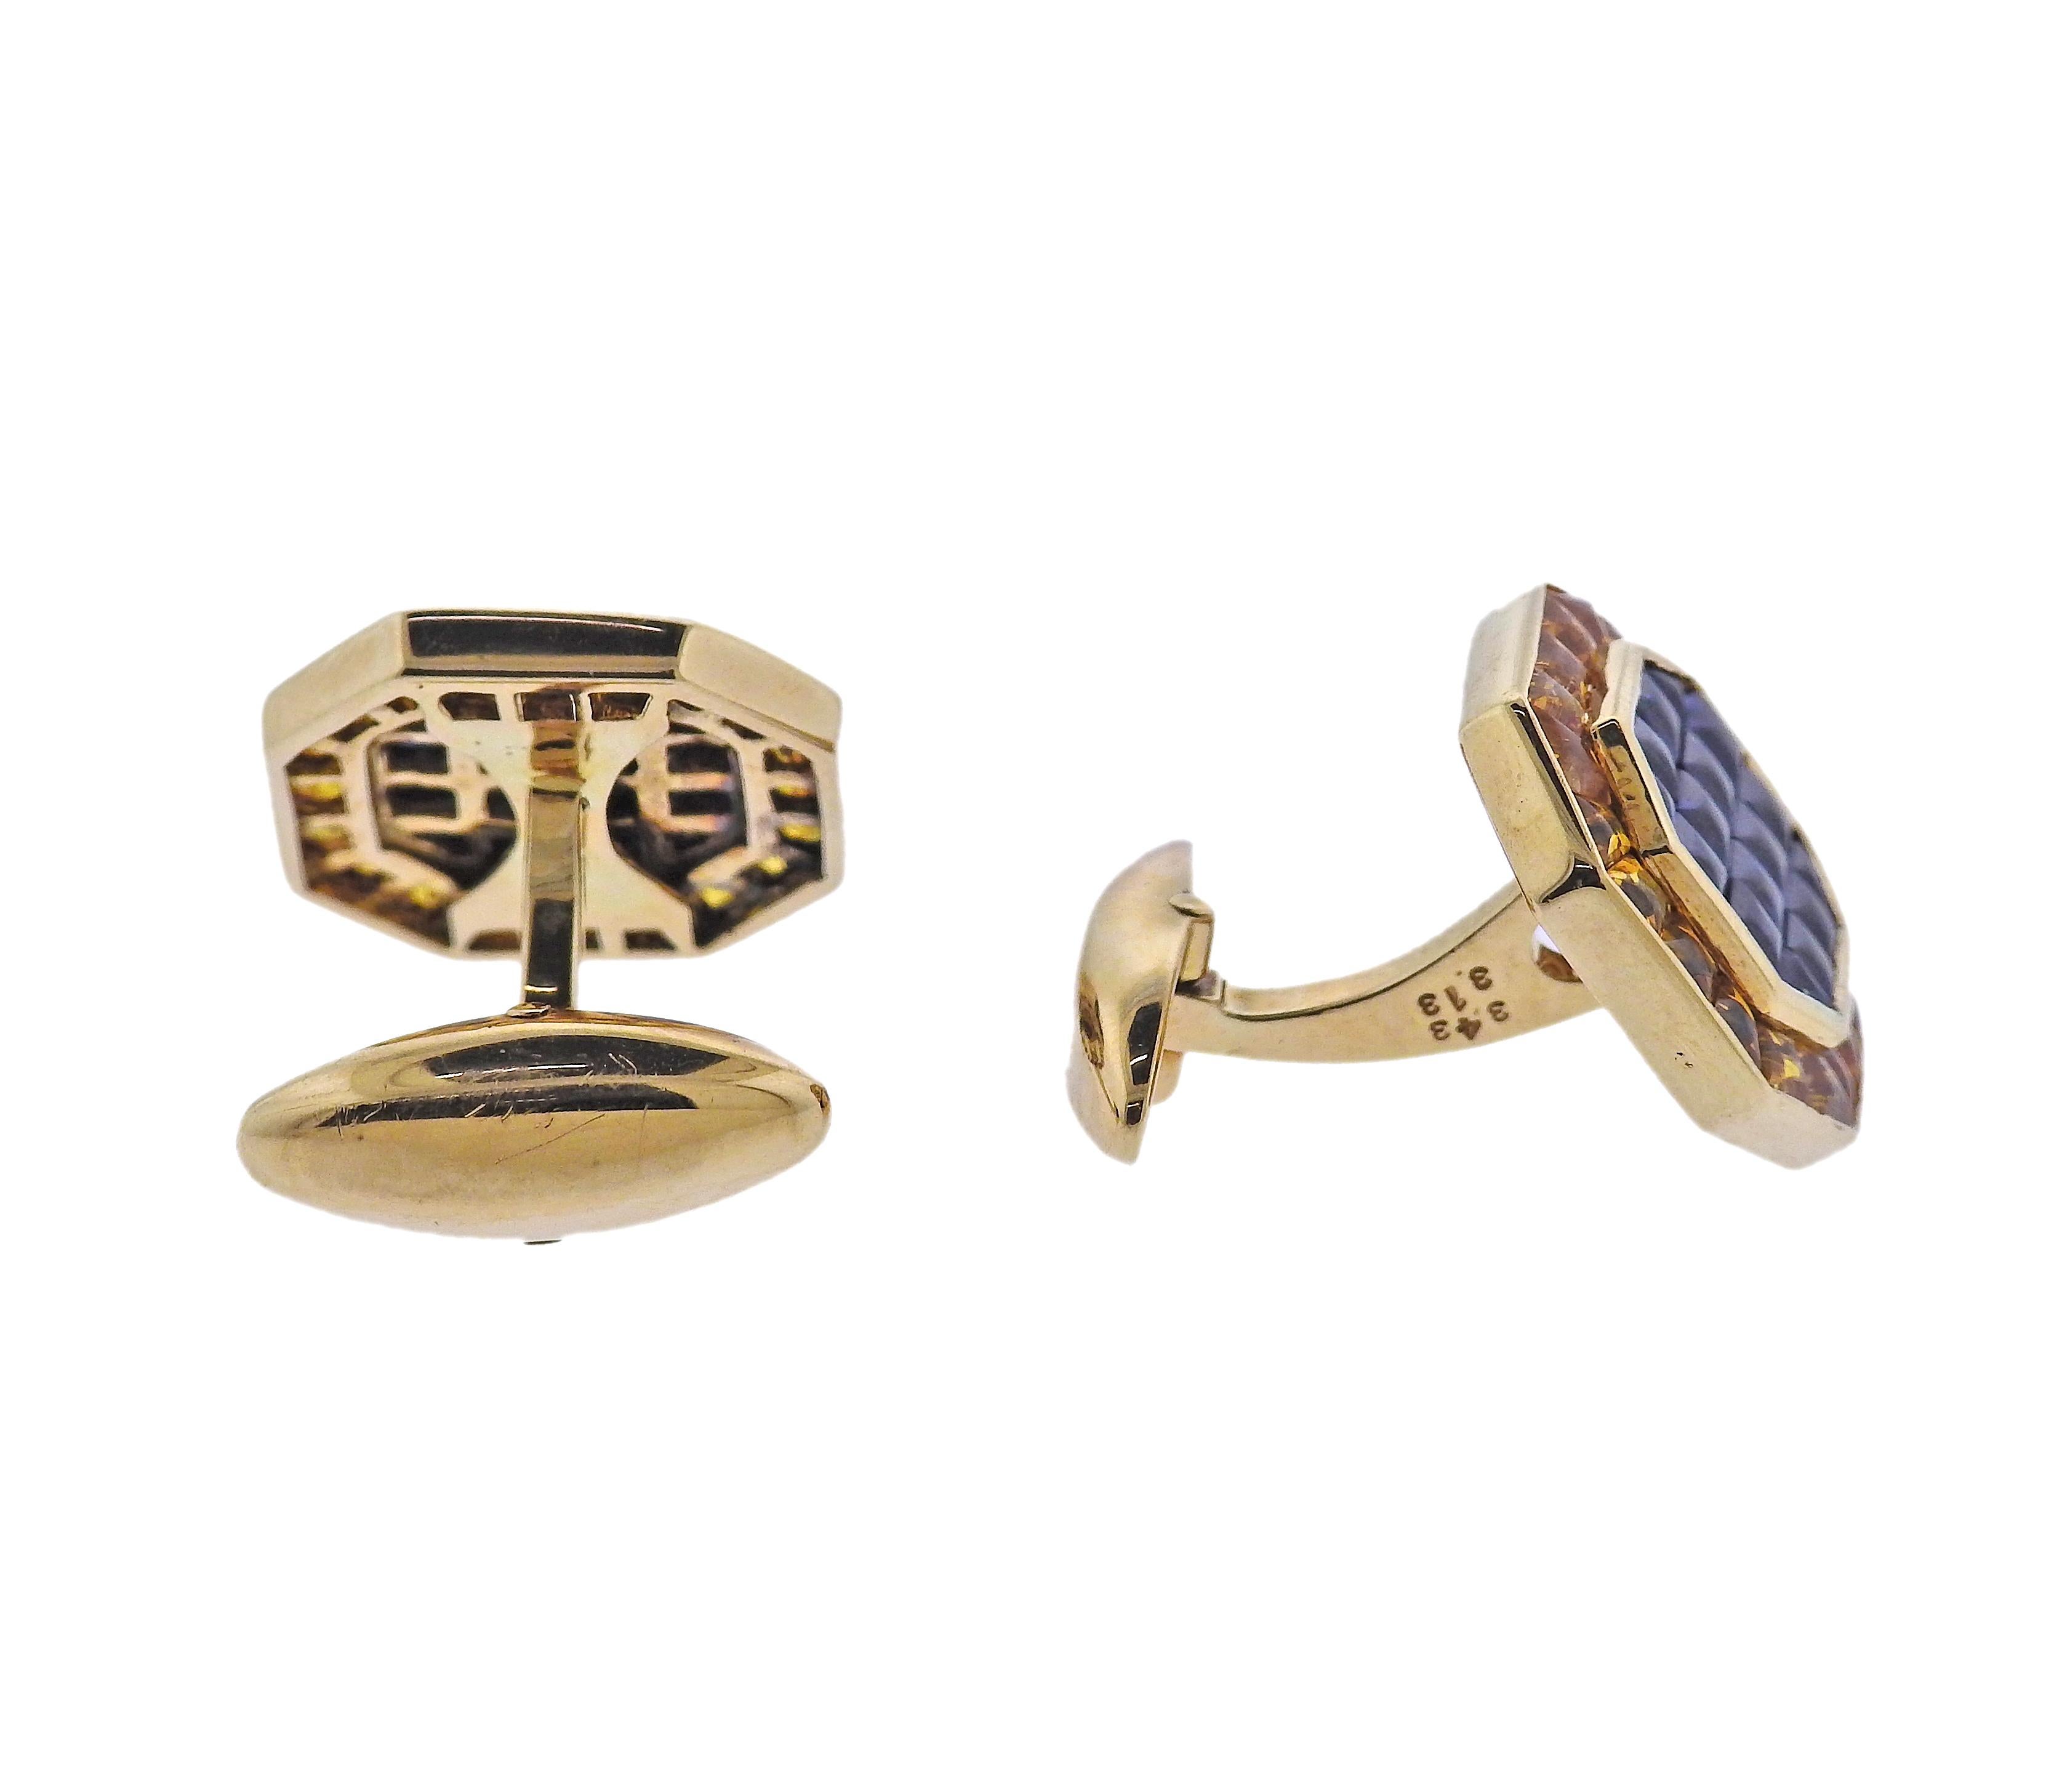 Pair of 18k yellow gold classic octagonal shaped cufflinks set with yellow and blue sapphires. Cufflinks measure 16mm x 16mm. Marked: K18. Weight is 13.7 grams.